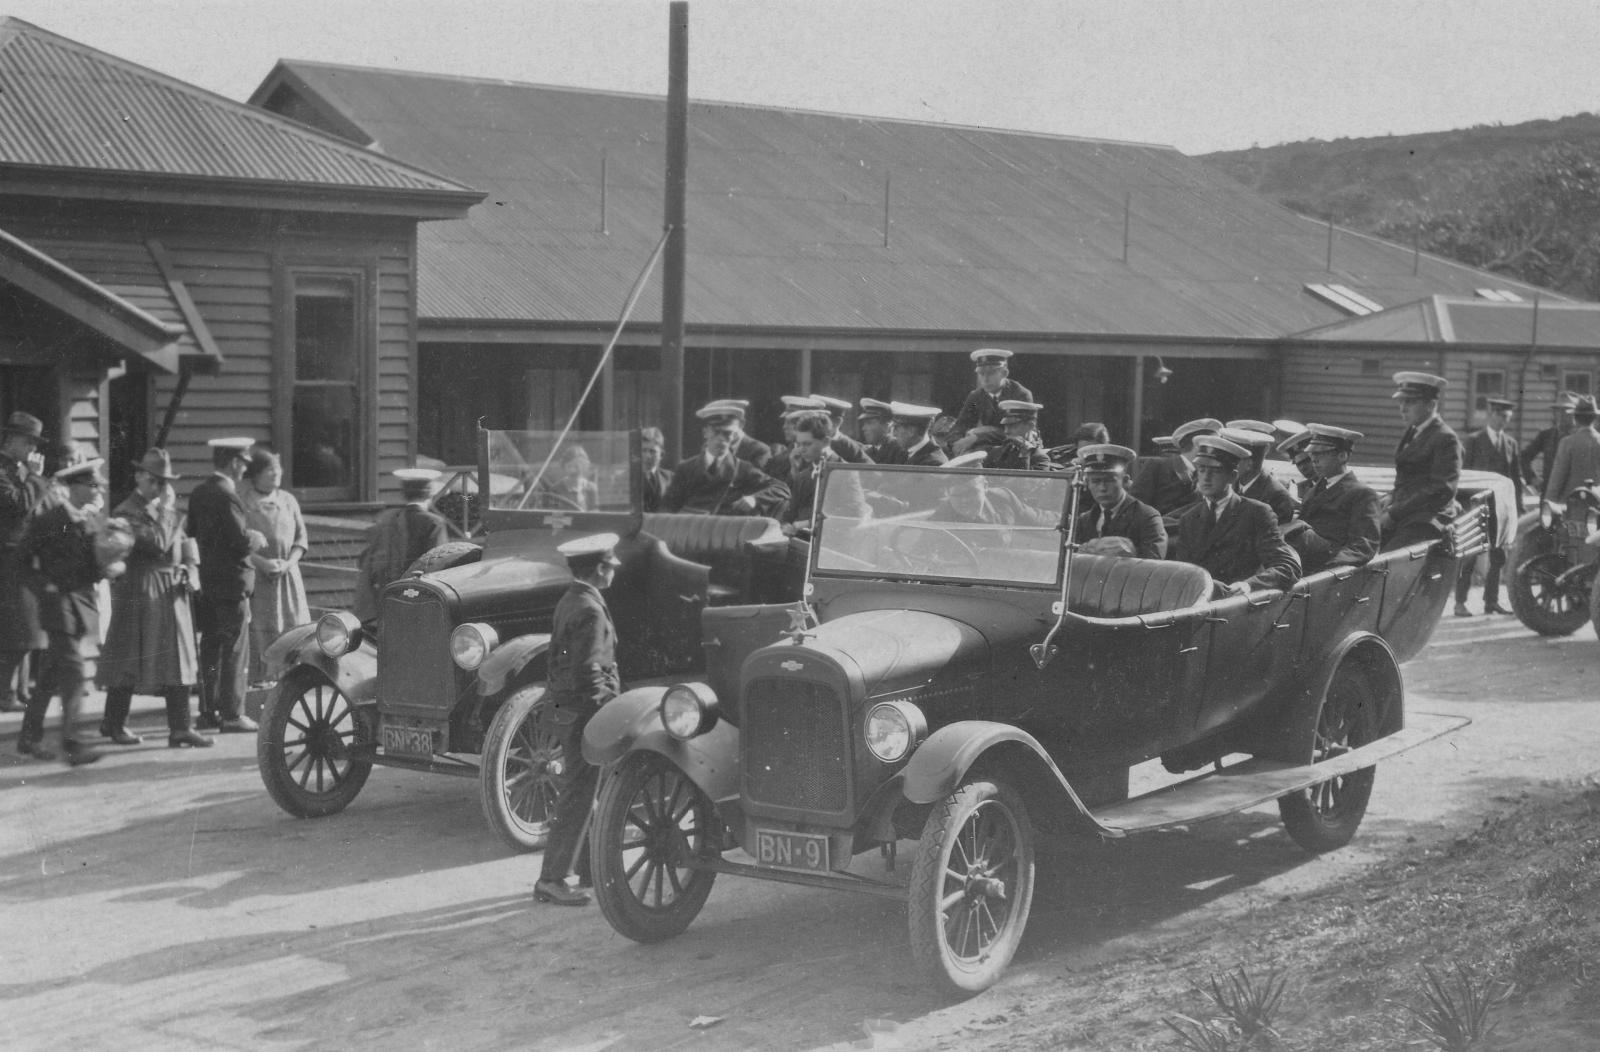 Percy Bignell’s Chevrolet with BN9 and his Charabanc BN38 carrying English Public School students from Caves House in 1929. Photo 58 BHS Archive